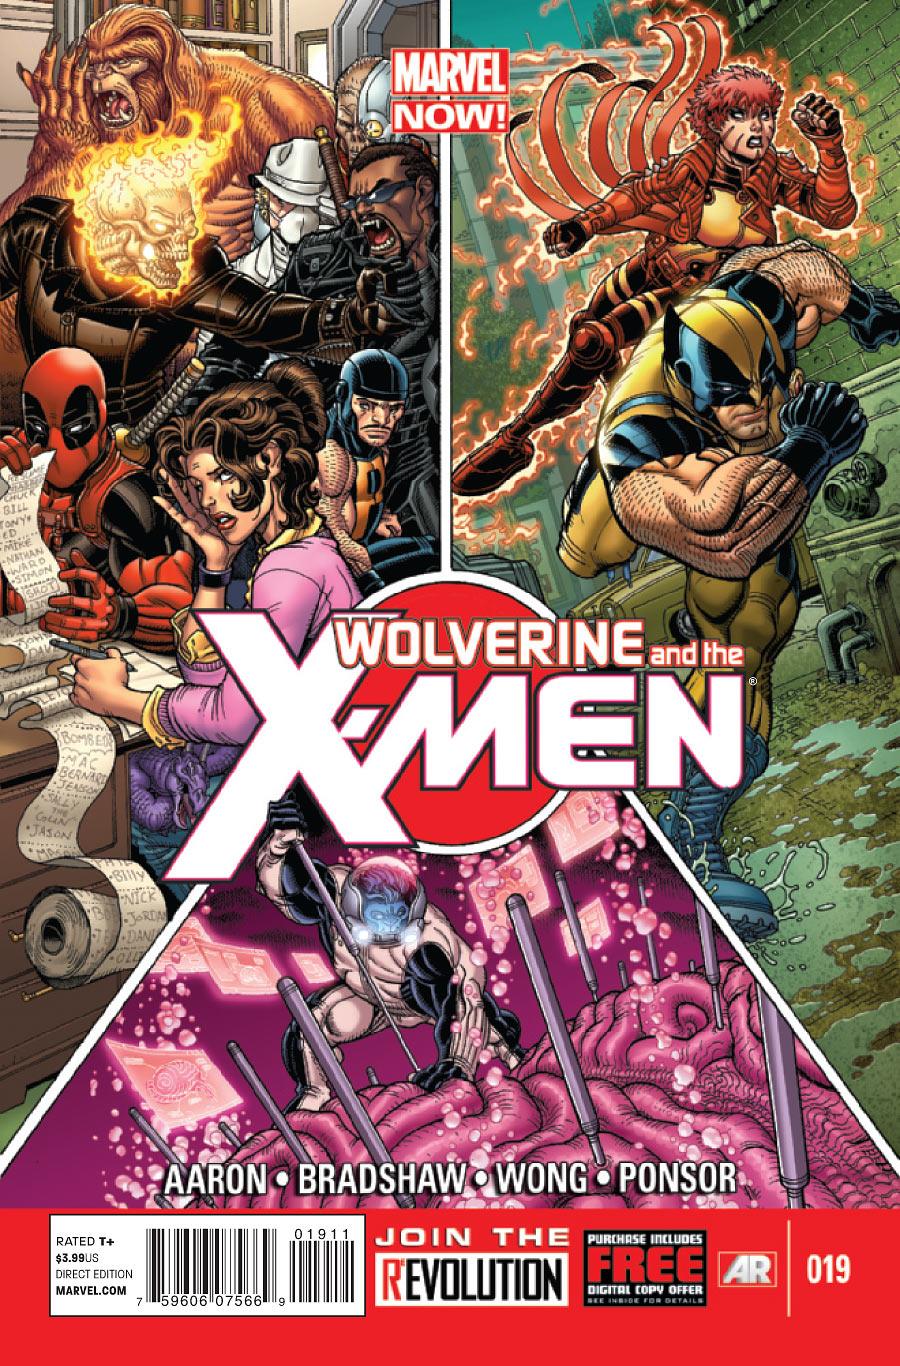 Wolverine and the X-Men Vol. 1 #19